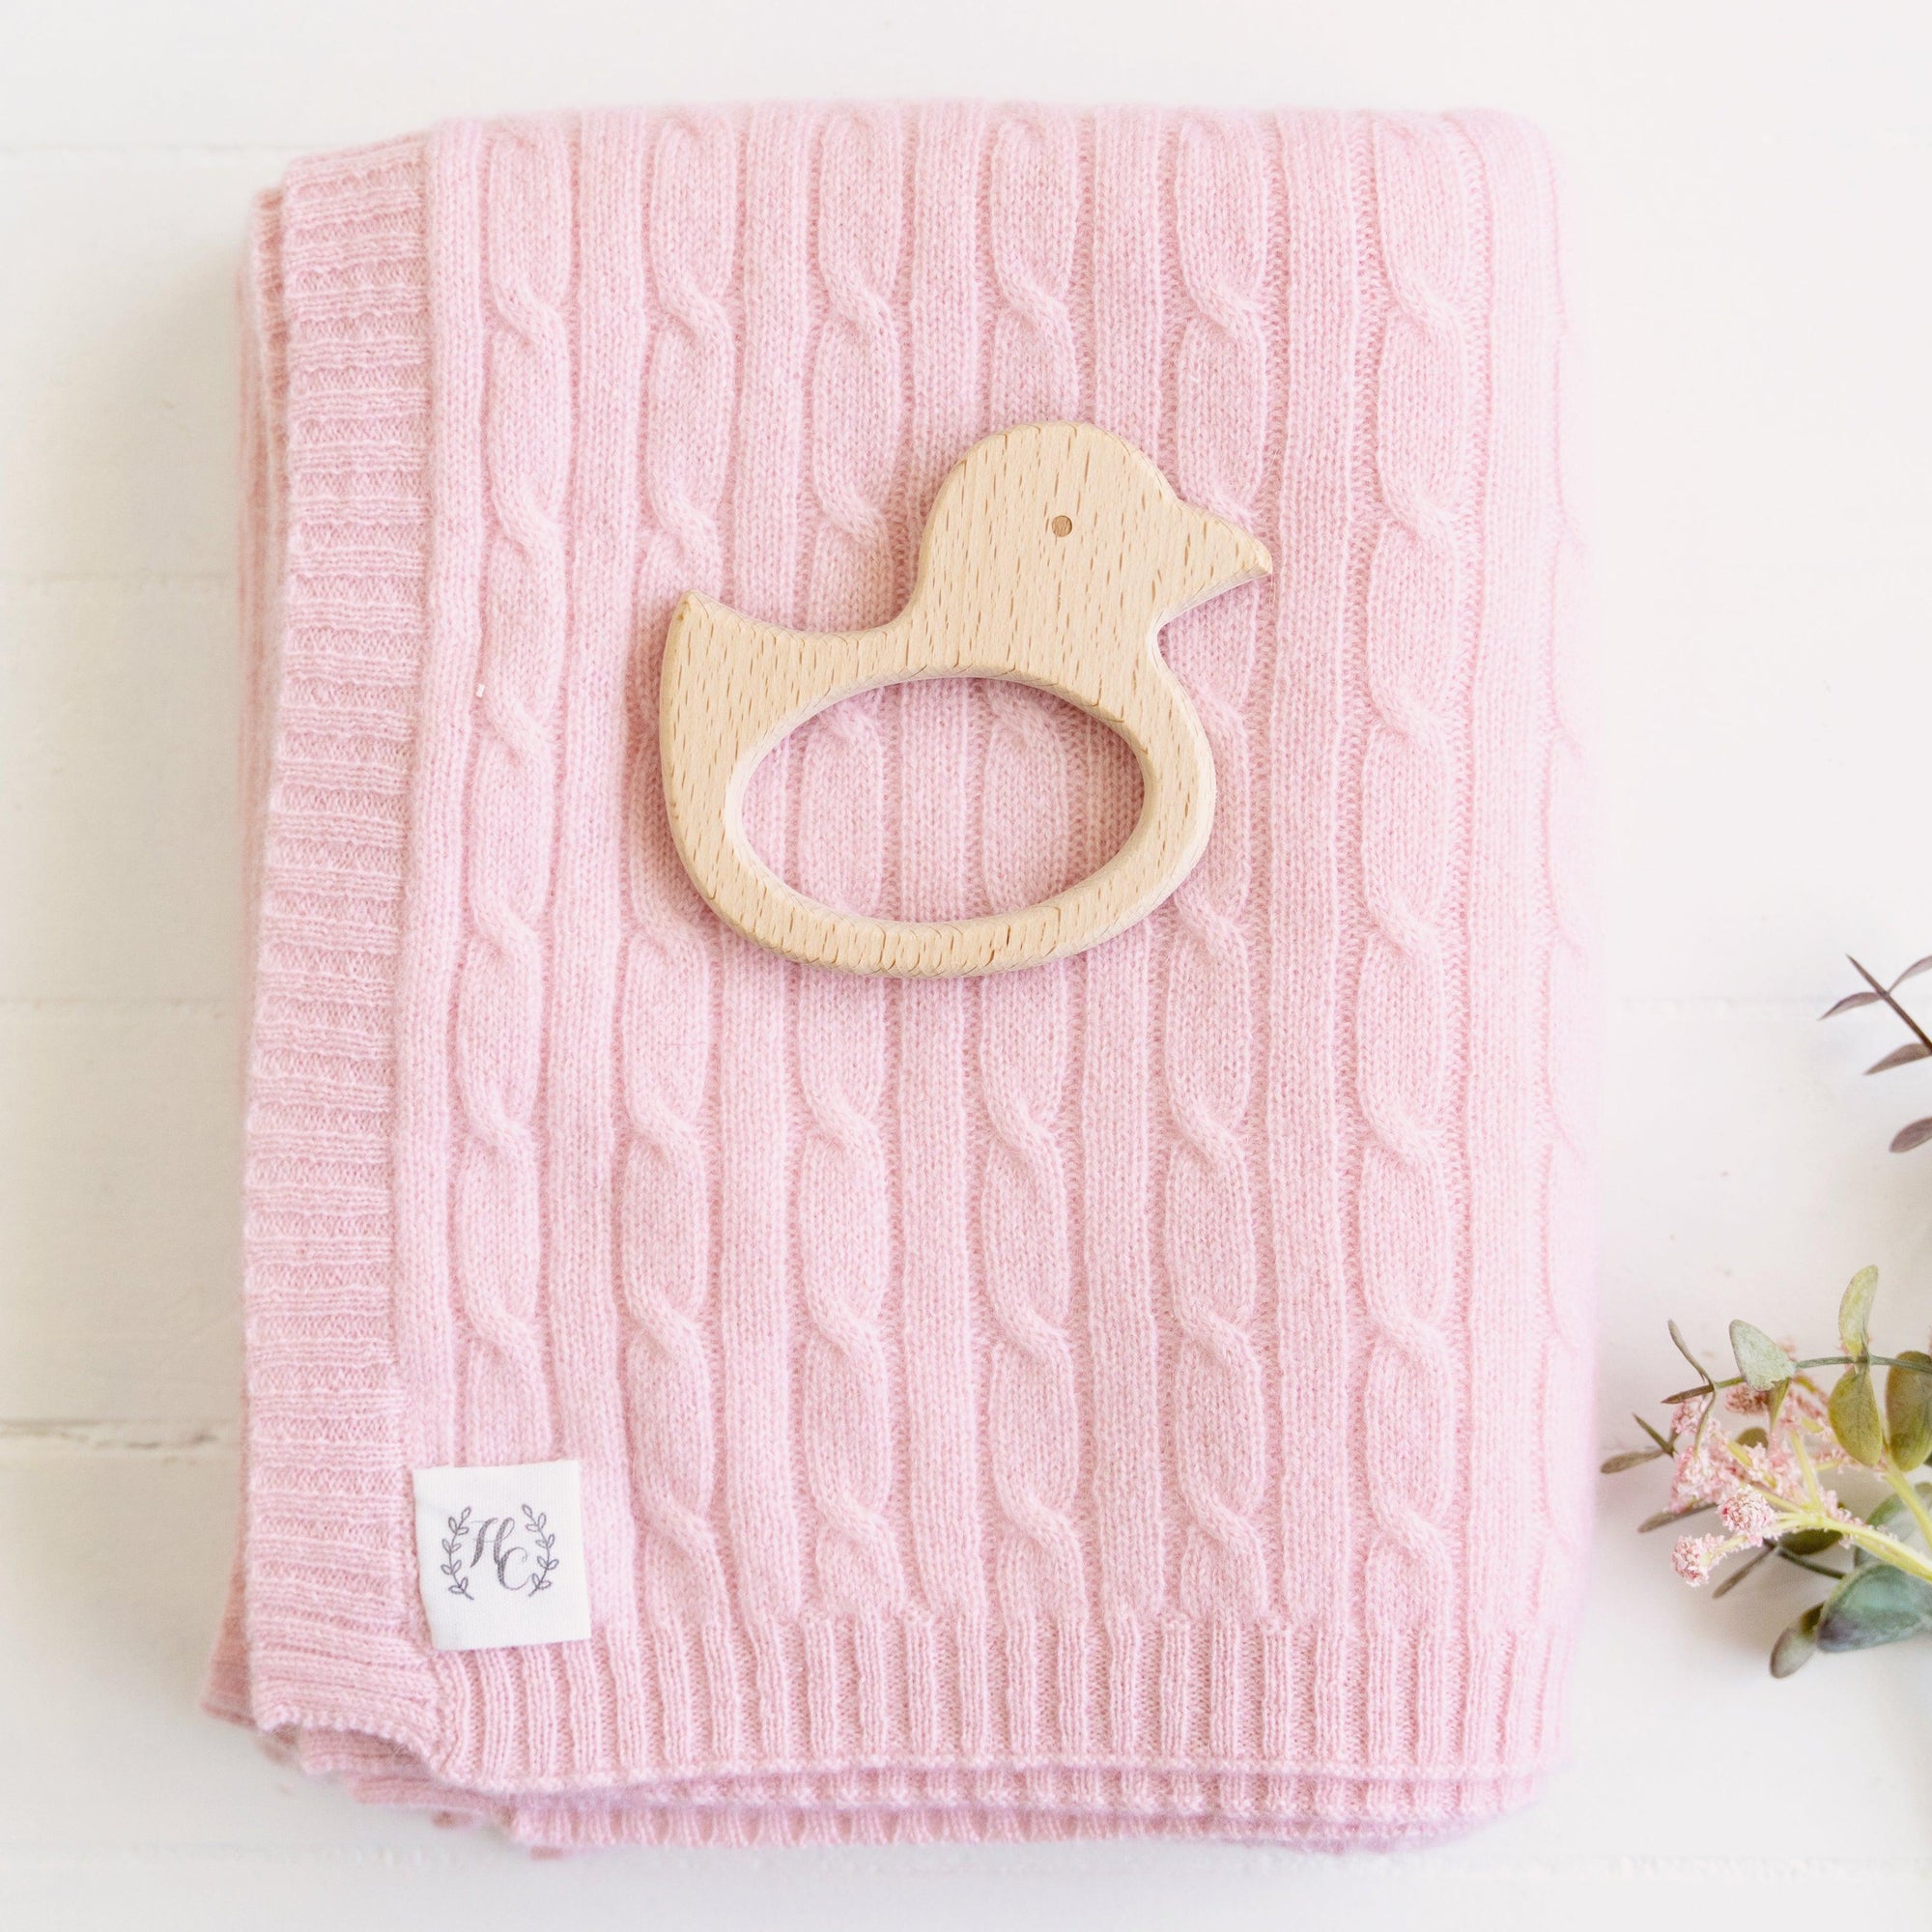 Cashmere Cable Knit Baby Blanket - Blush - Heirloom Cashmere Australia